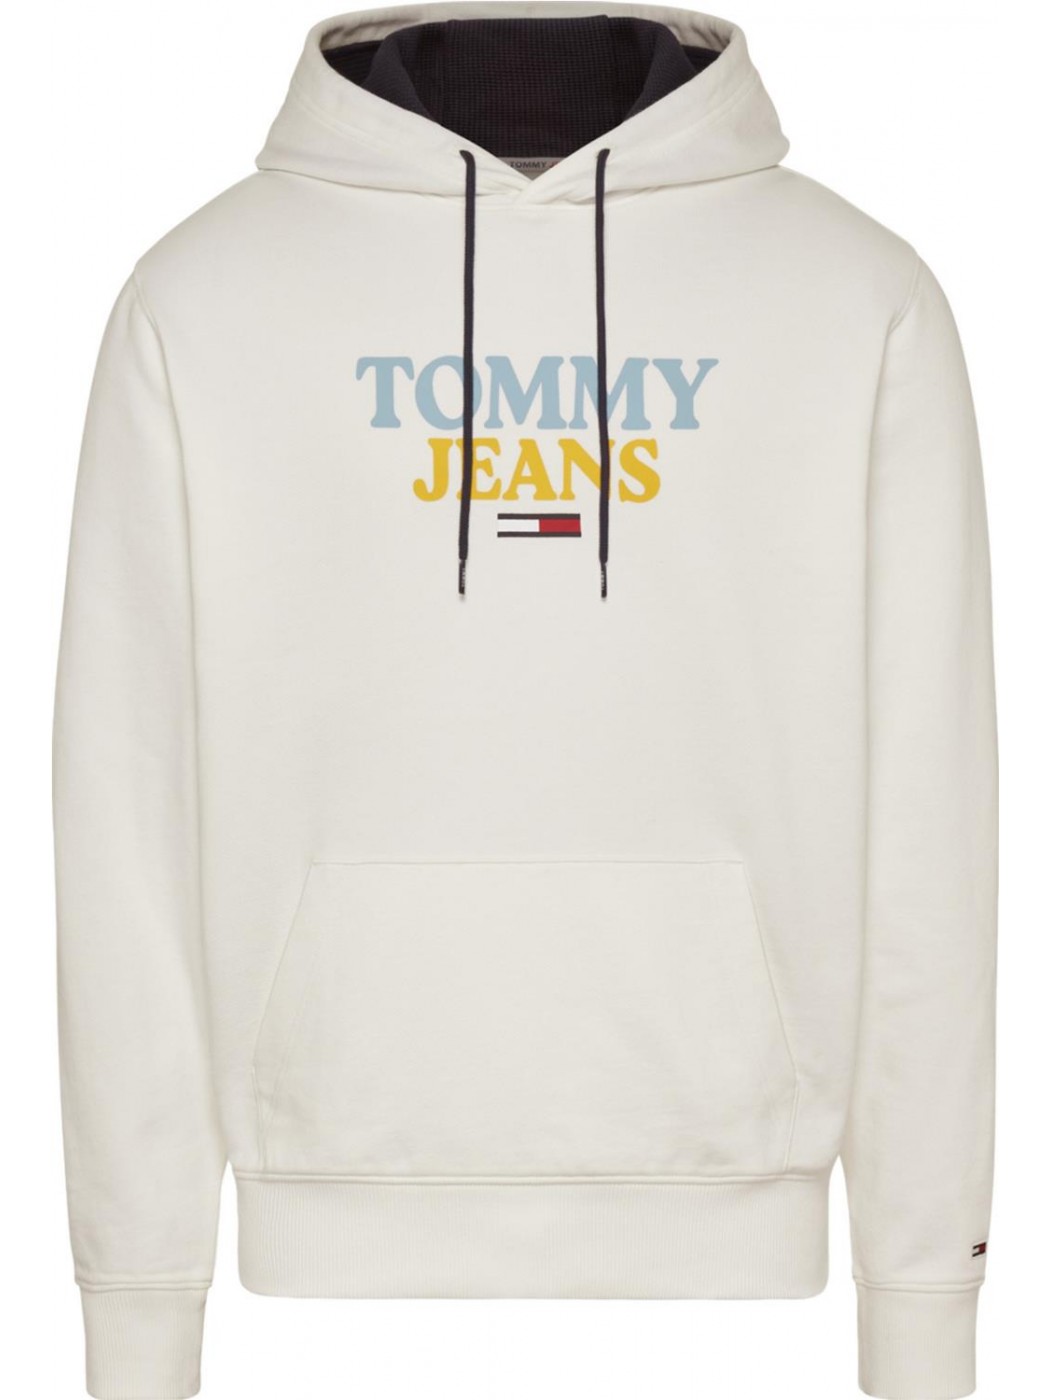 SUDADERA TOMMY JEANS HOMBRE...